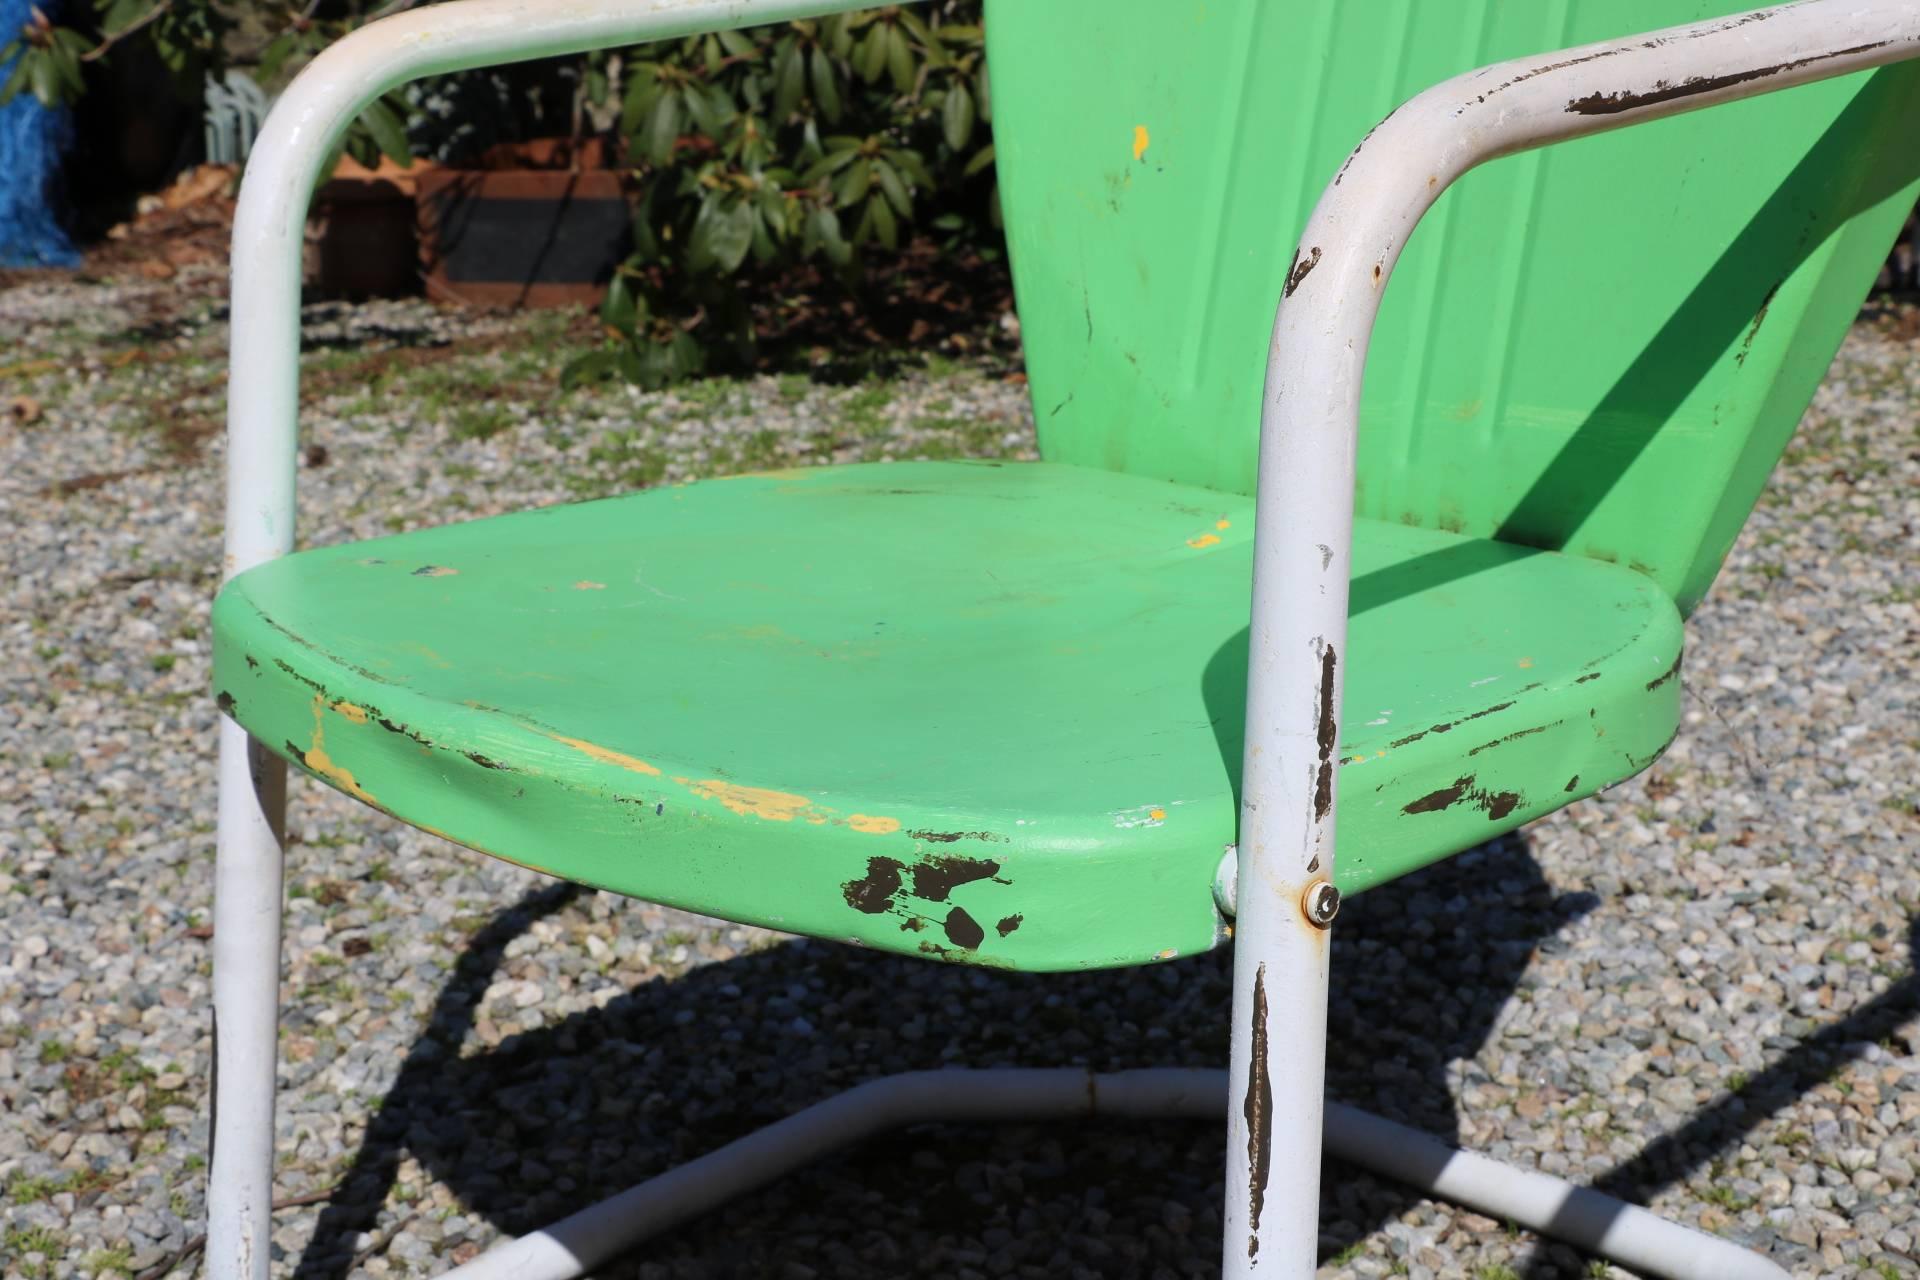 A cool old pair of vintage Mid-Century Modern steel 1950s tangerine and lime green perfect for any party rocker chairs - have some summer fun! The real deal of a pair - add a punch of tangerine and lime green to your Yard/Patio/Porch/Room! and add